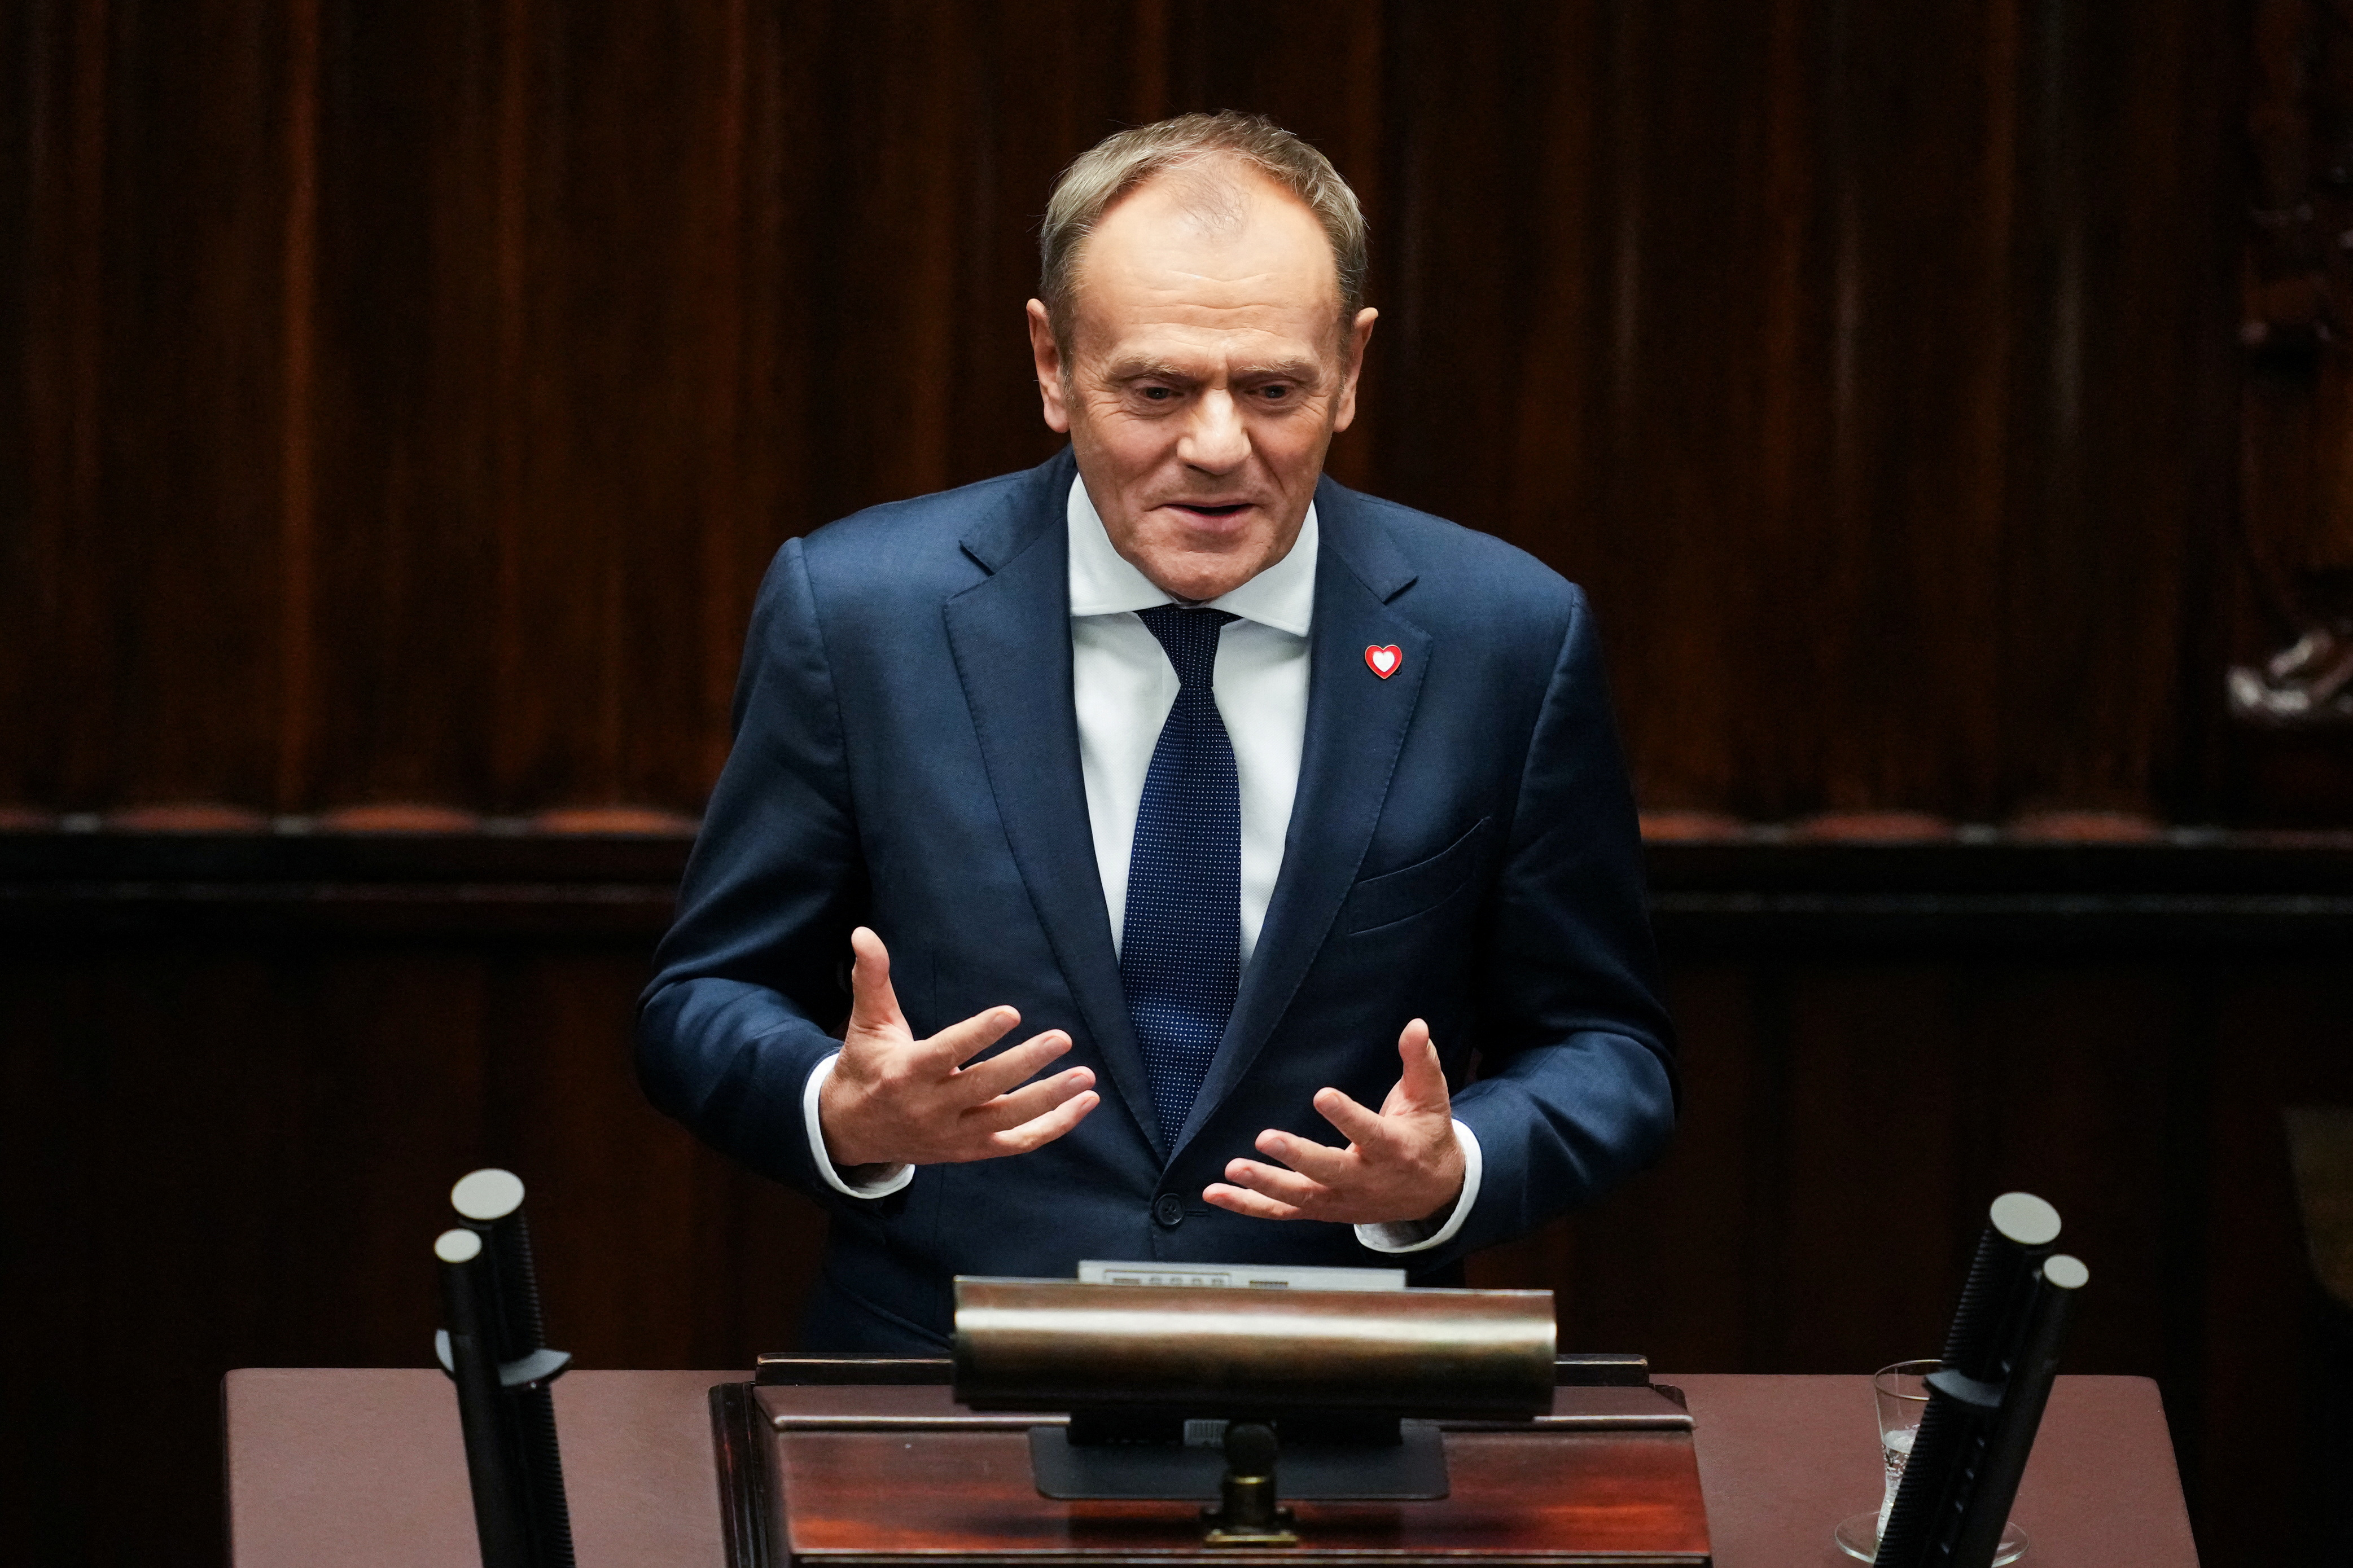 Newly appointed Polish Prime Minister Donald Tusk speaks during a parliament session, in Warsaw